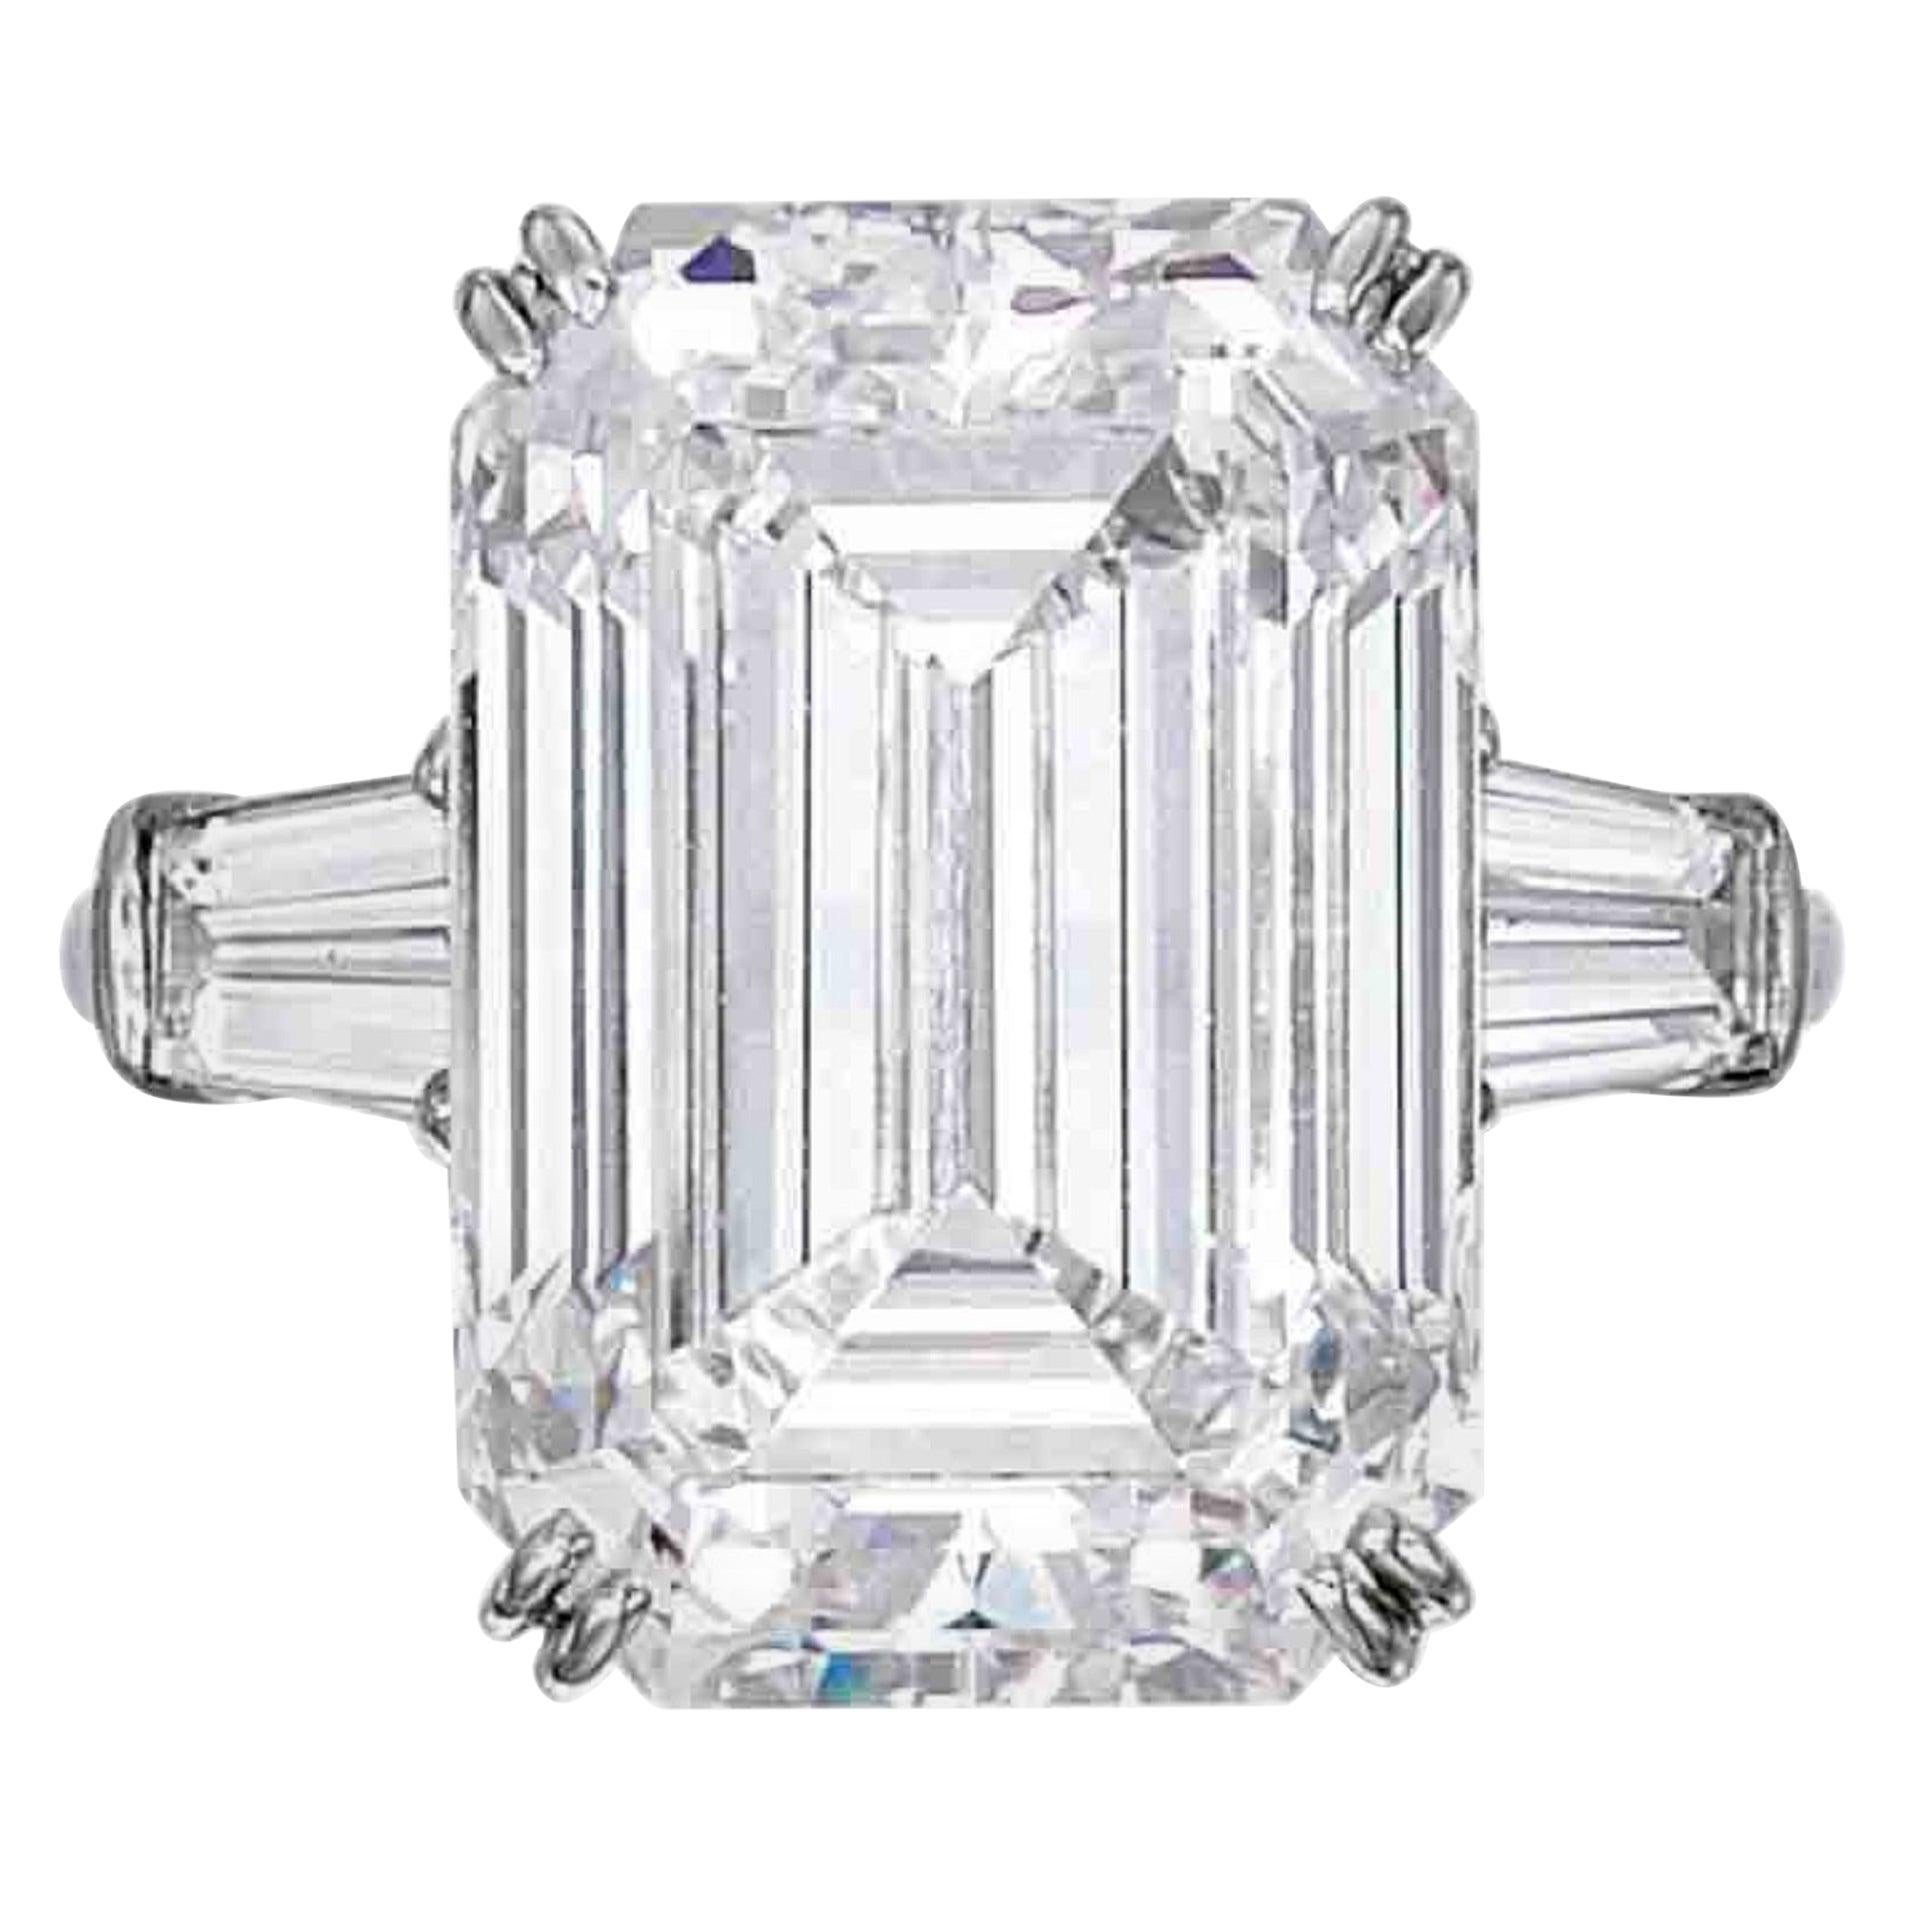 10 Carat GIA Certified Emerald Cut Diamond

Indulge in the ultimate expression of luxury and sophistication with our exquisite 10 carat GIA certified Emerald Cut Diamond. Radiating with timeless allure and unparalleled beauty, this breathtaking gem